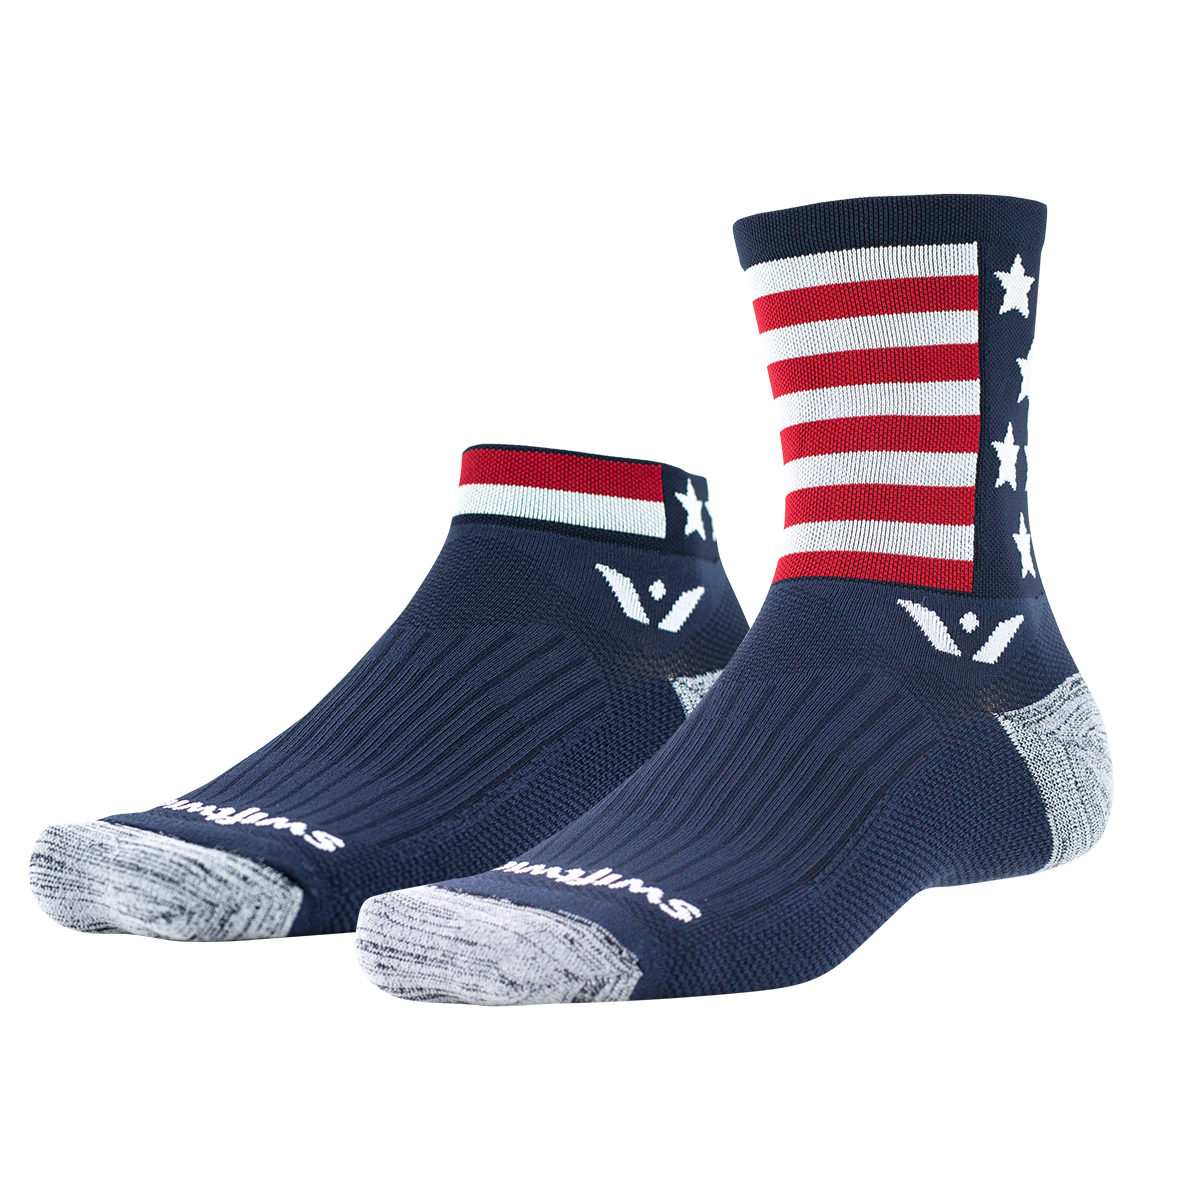 Swiftwick Celebrates “Made in USA” Commitment with VISION™ American Spirit